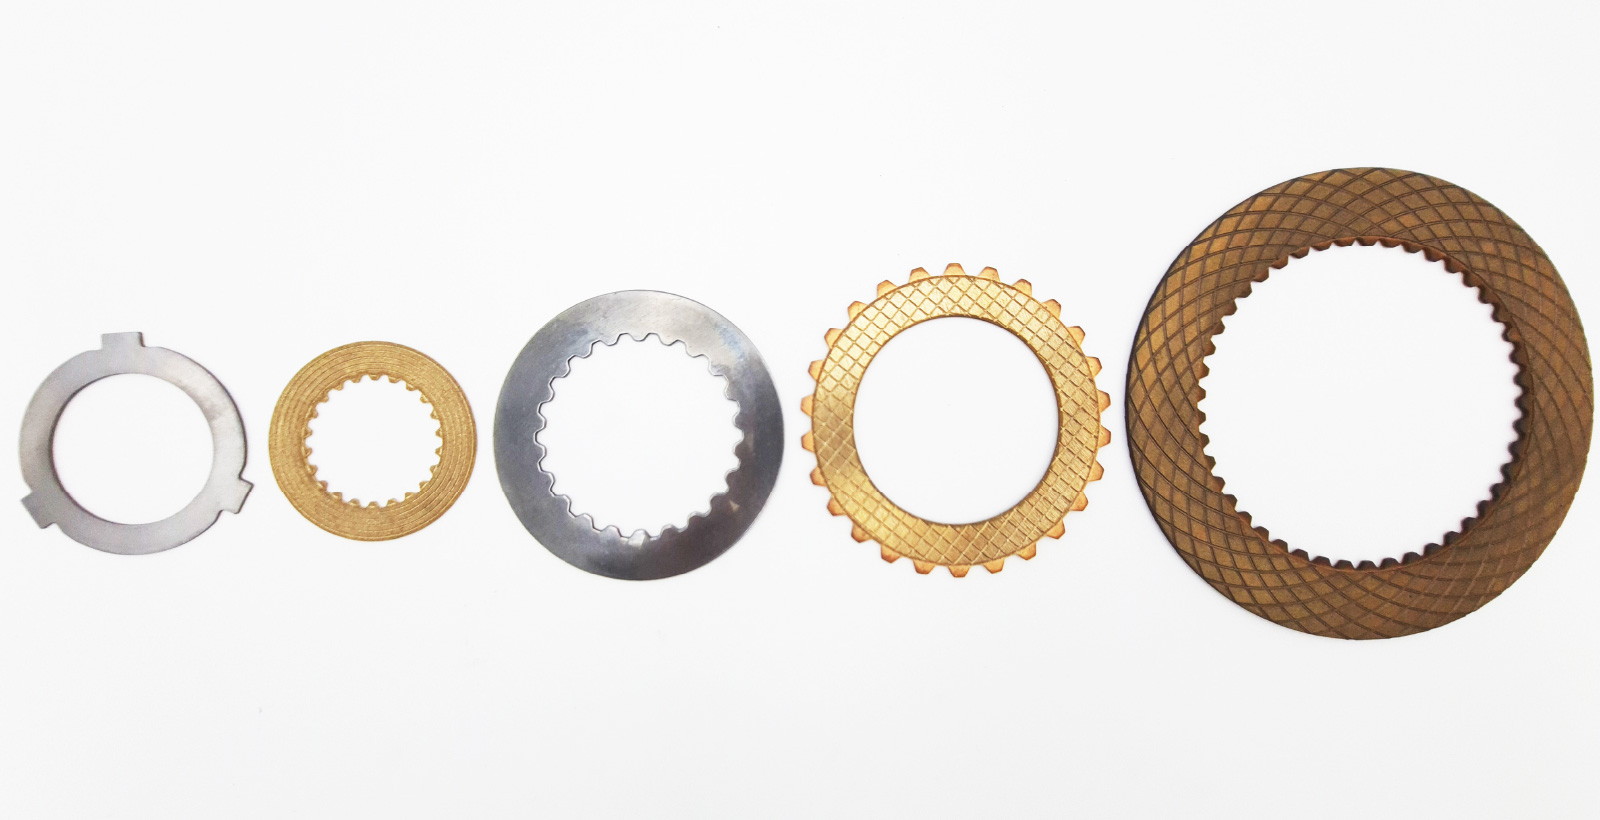 Ceramic Transmission Discs for Paper and Pulp Industry